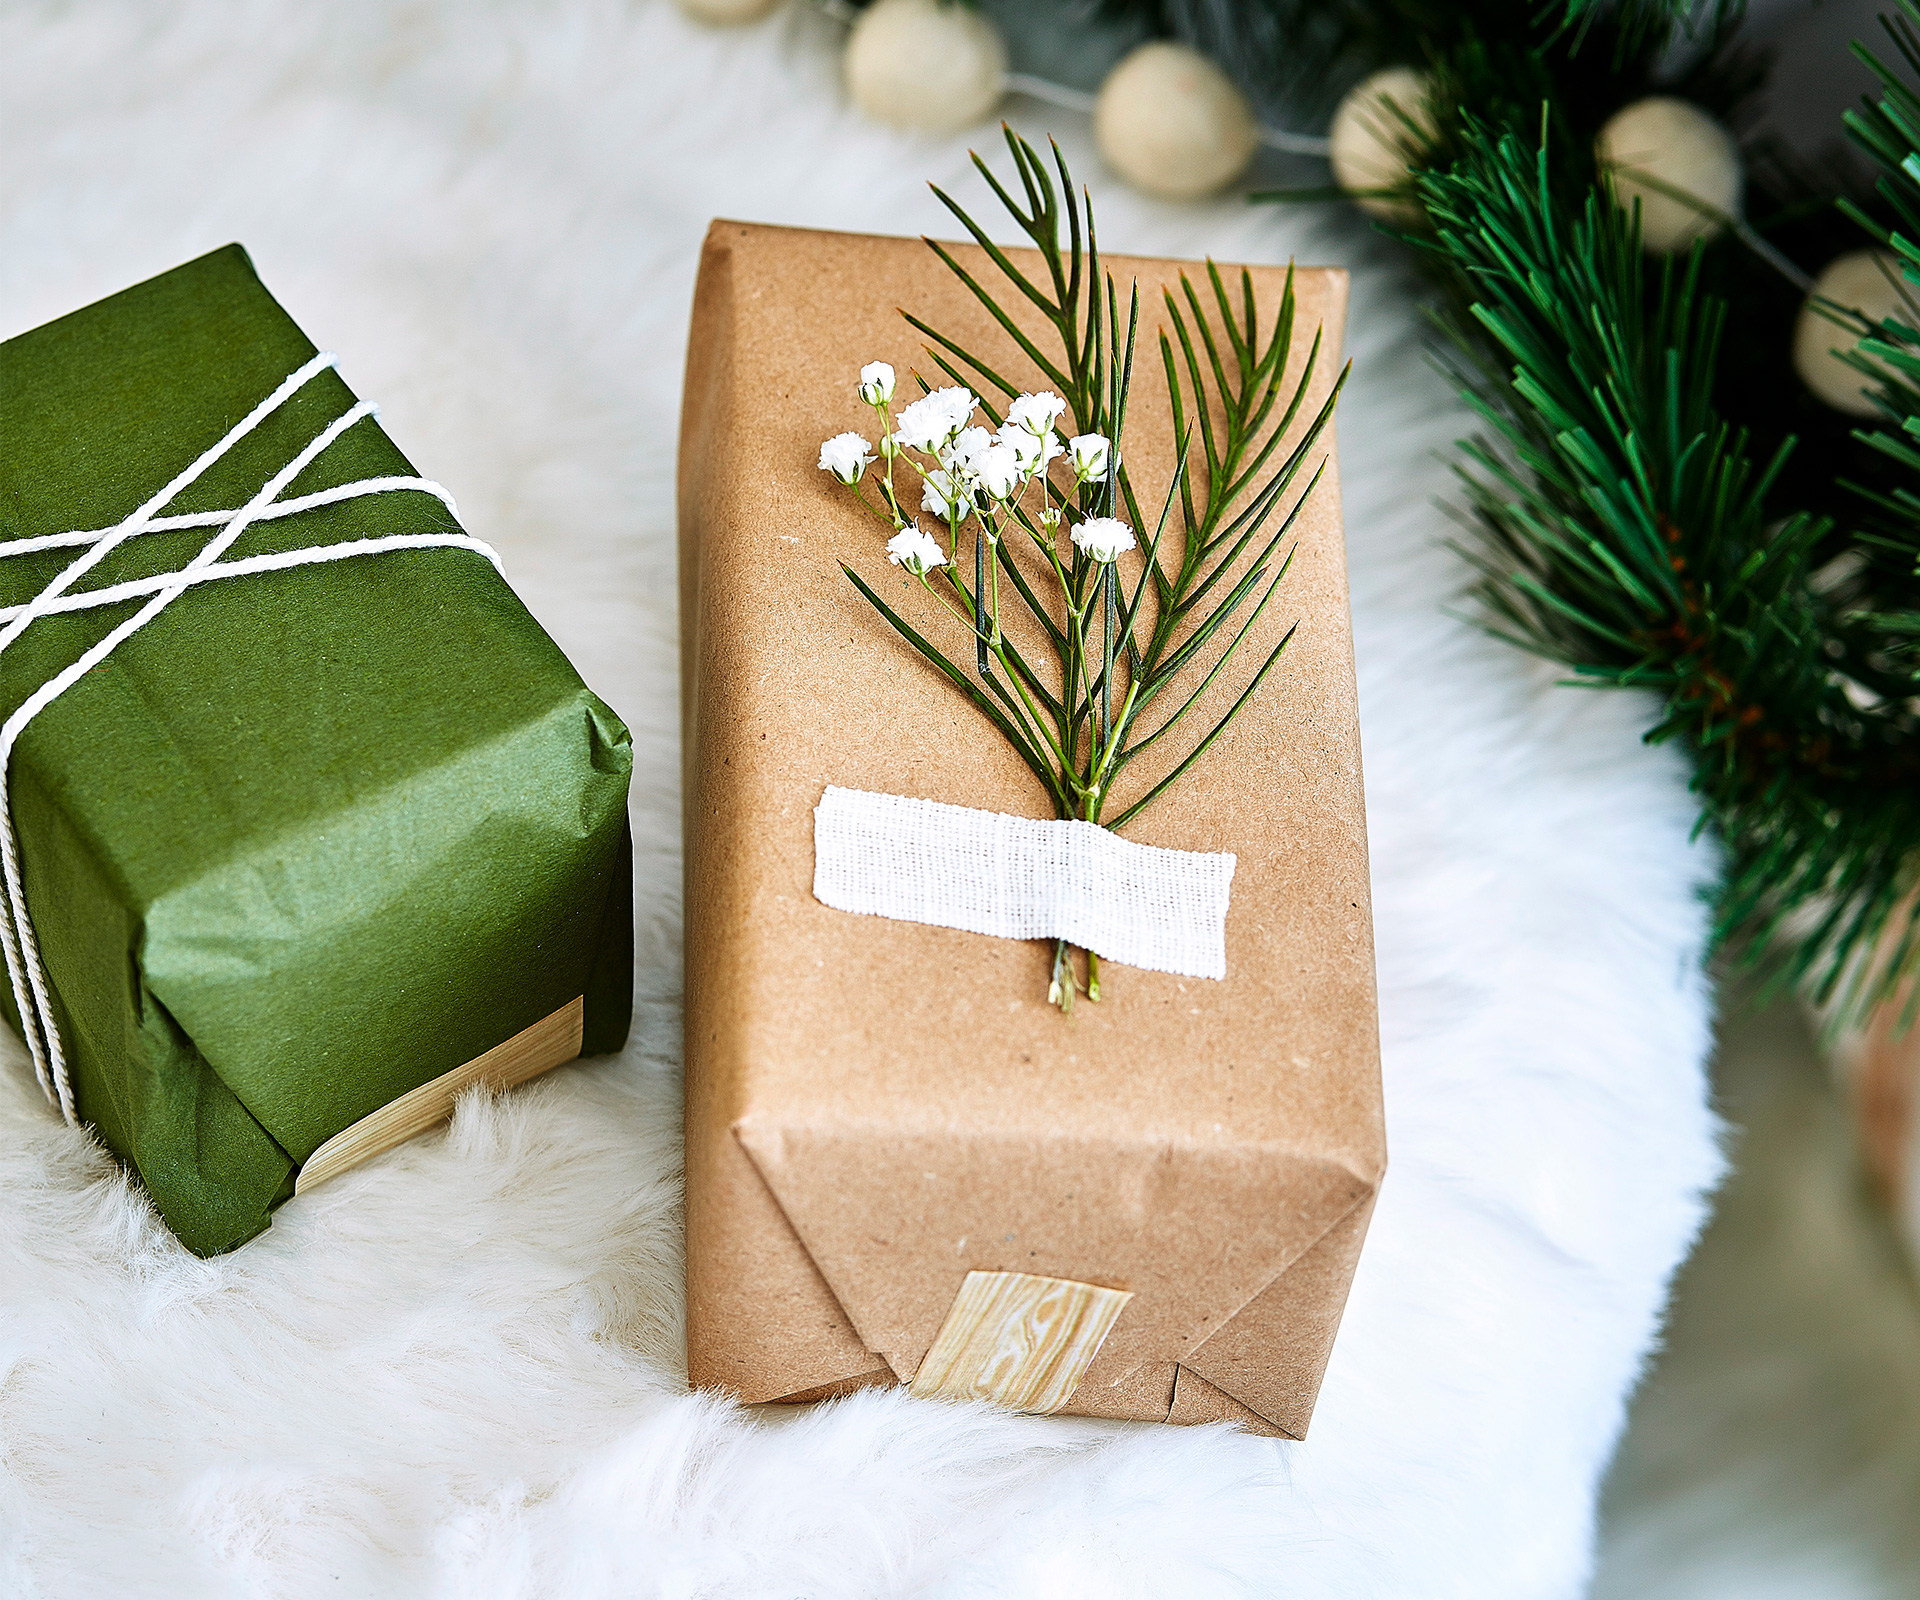 Here's how to do ecofriendly Christmas gift giving this December